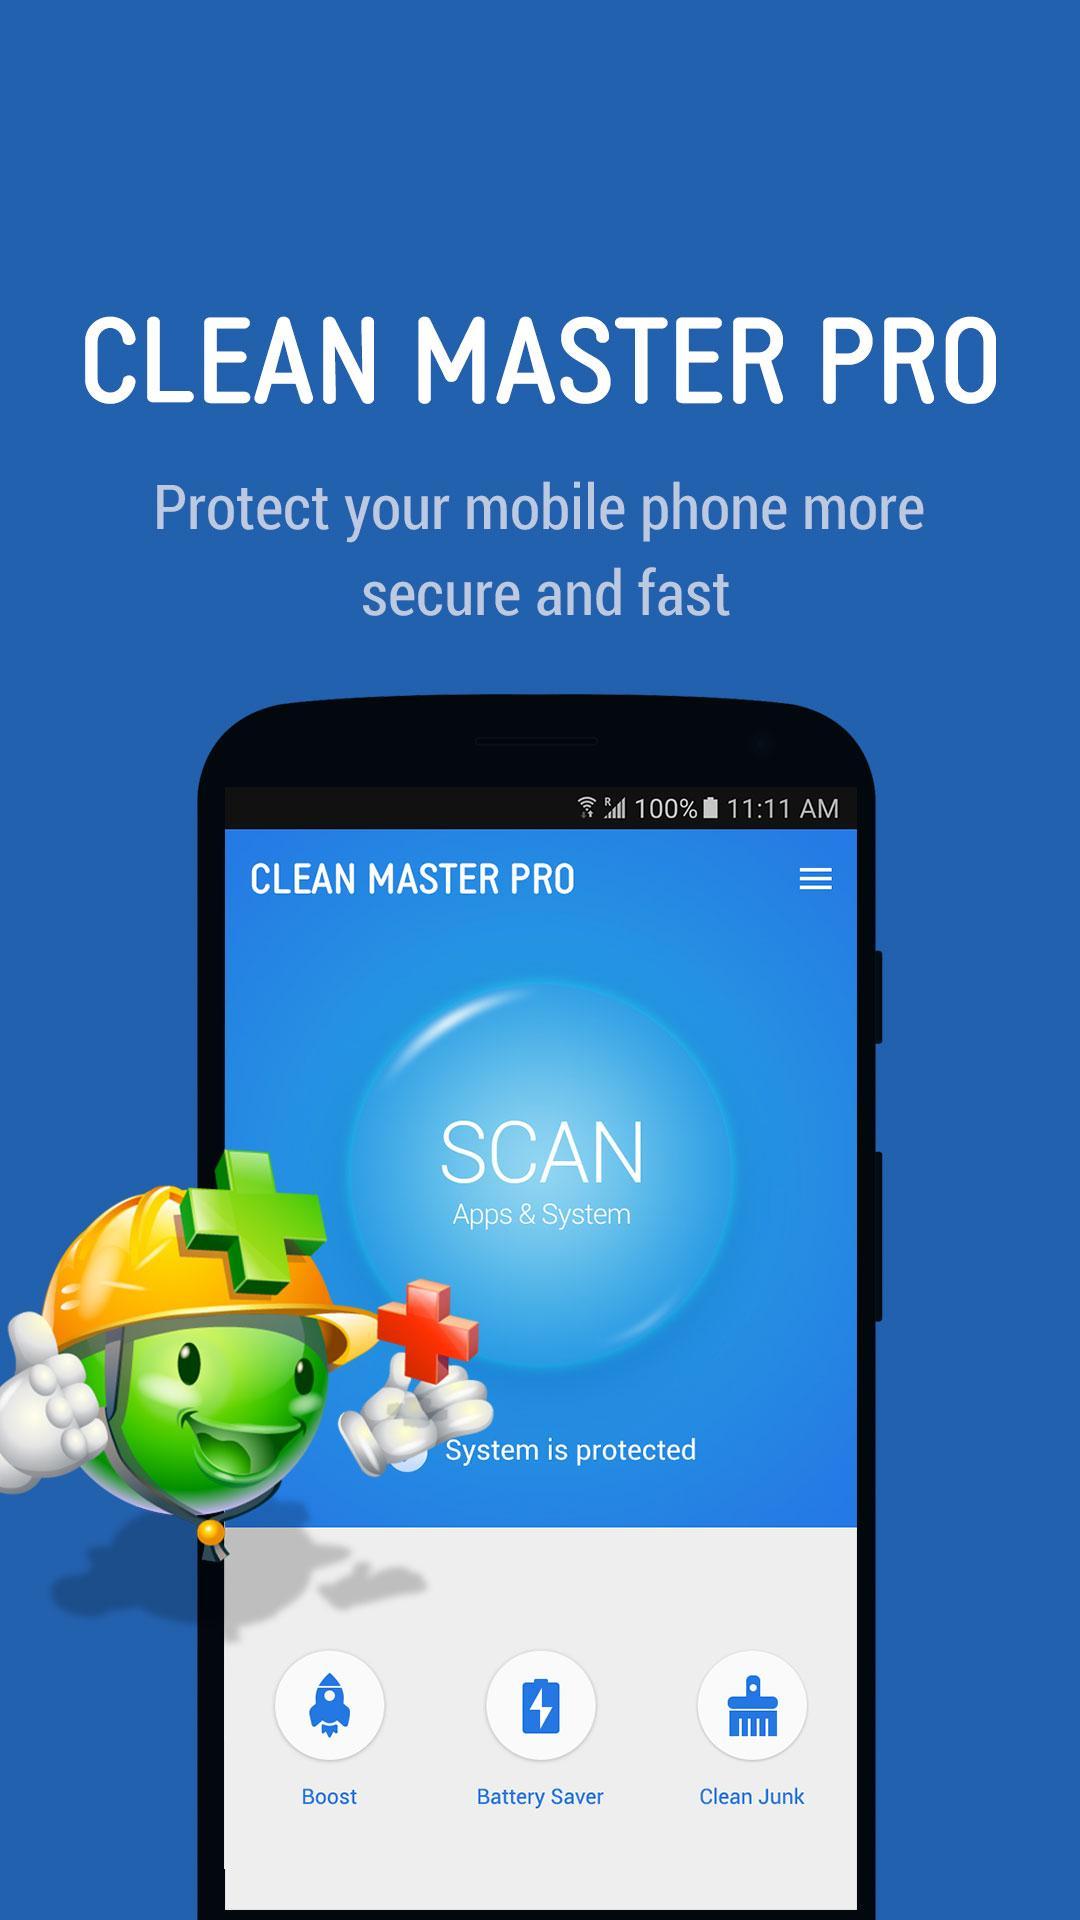 Clean Master Pro for Android - APK Download